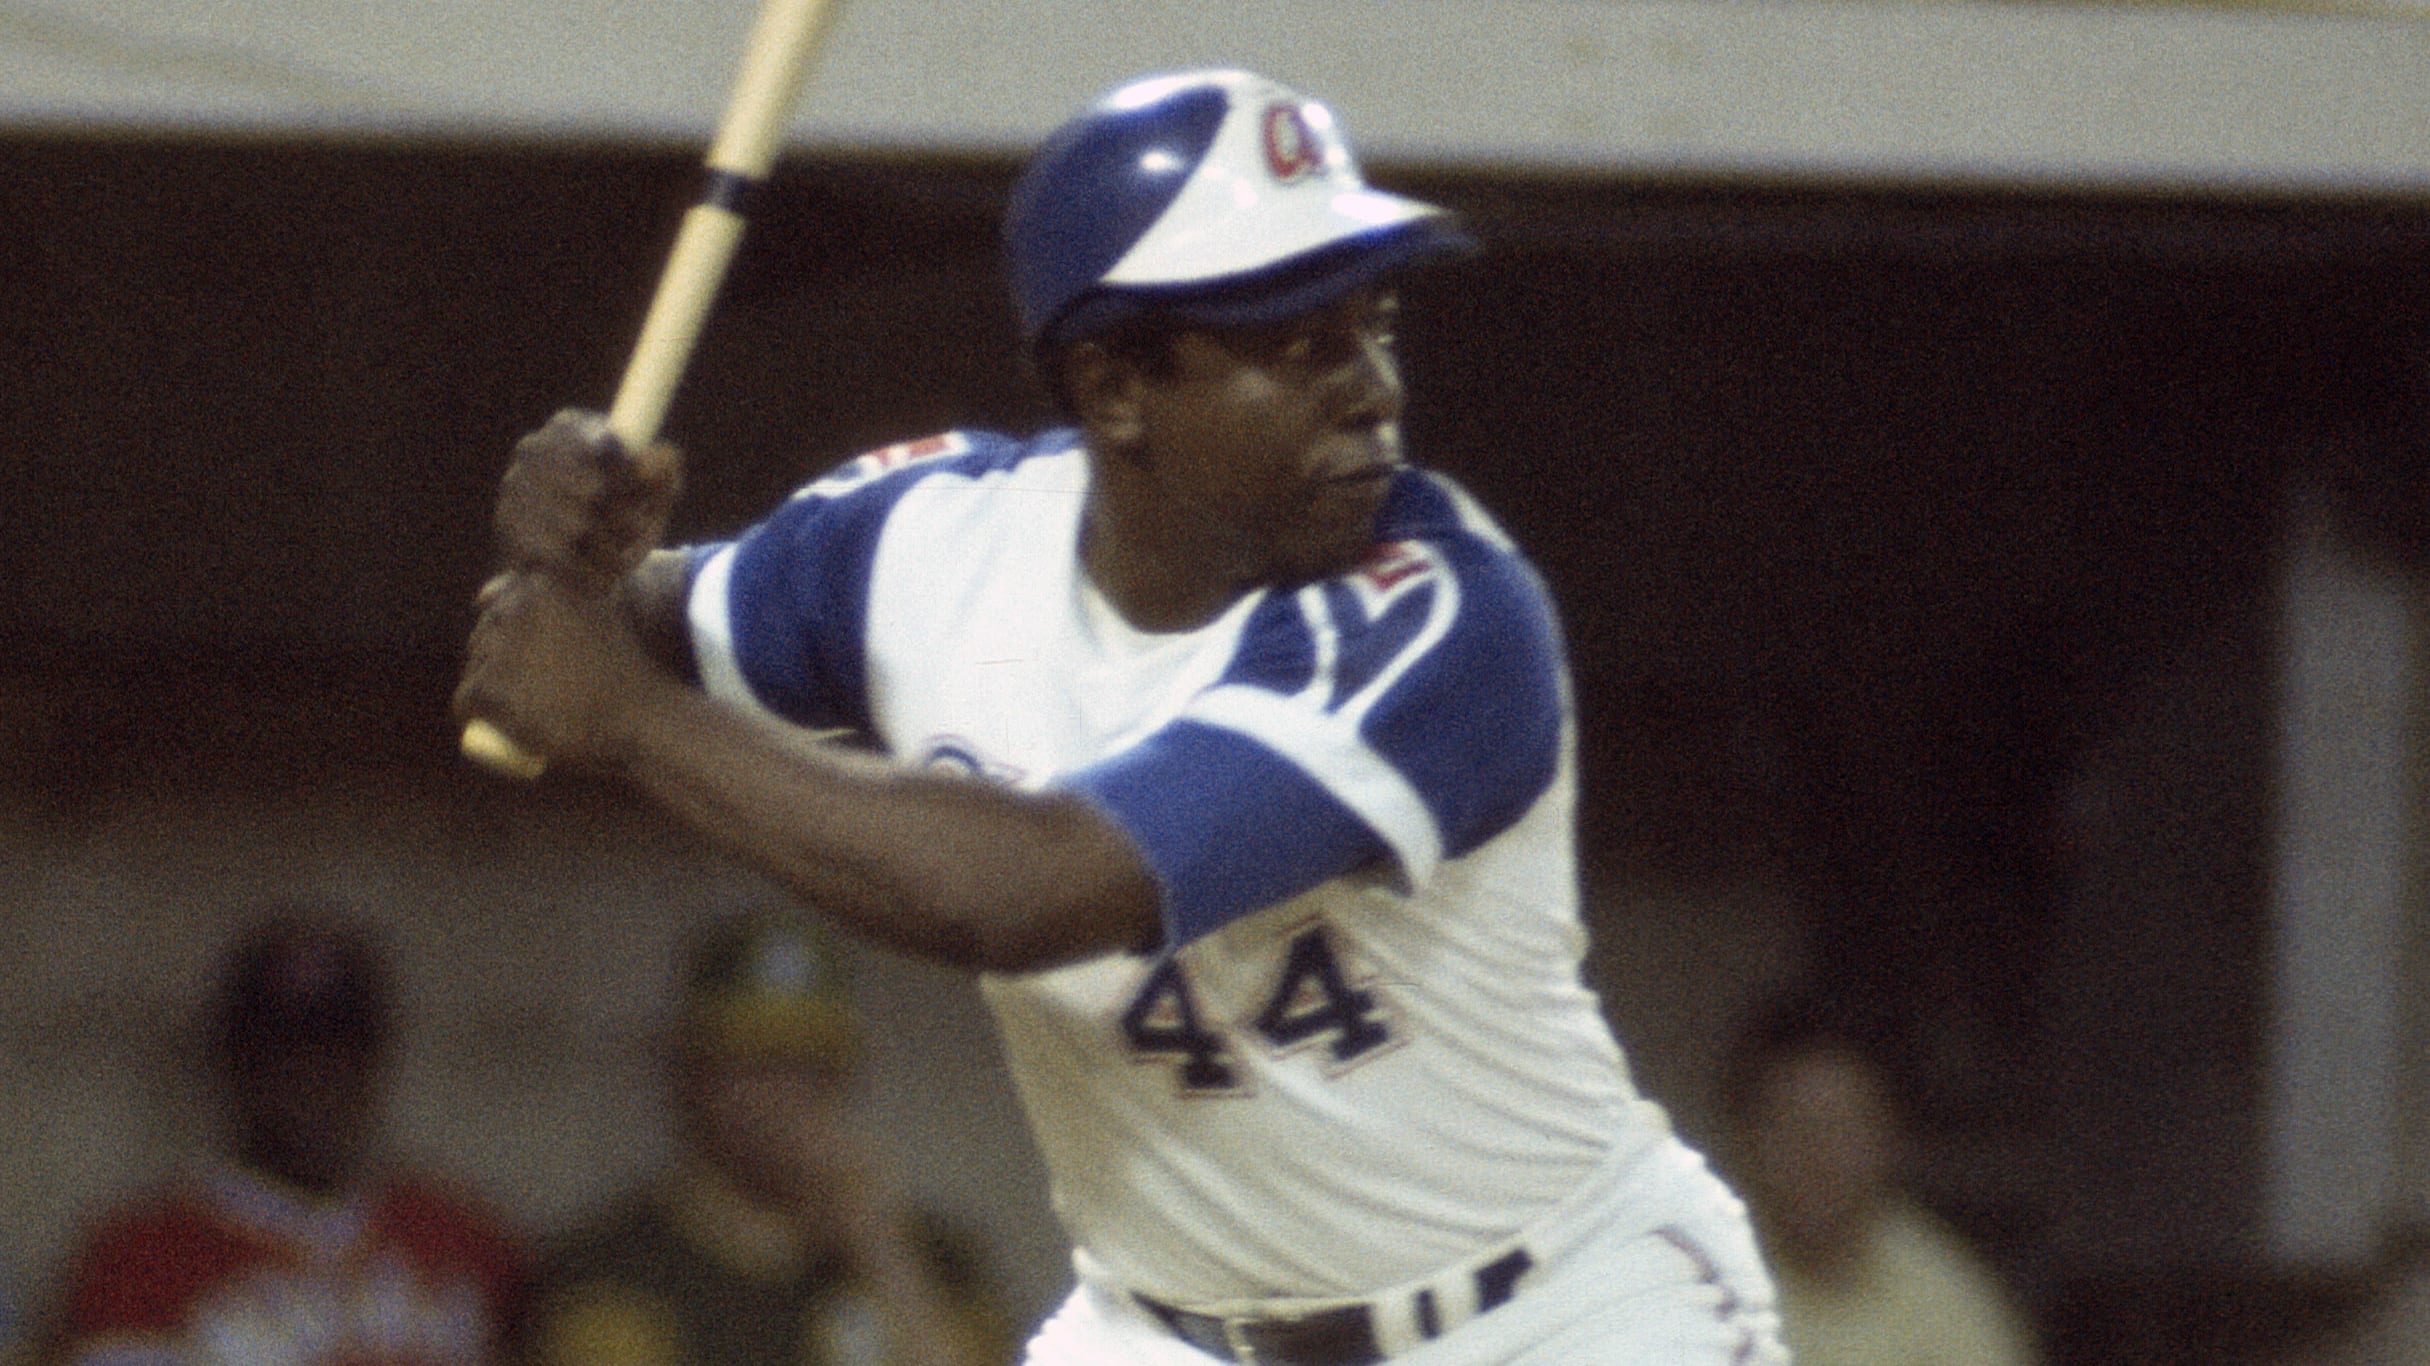 Hank Aaron’s record-breaking 715th home run transcended baseball and sports.